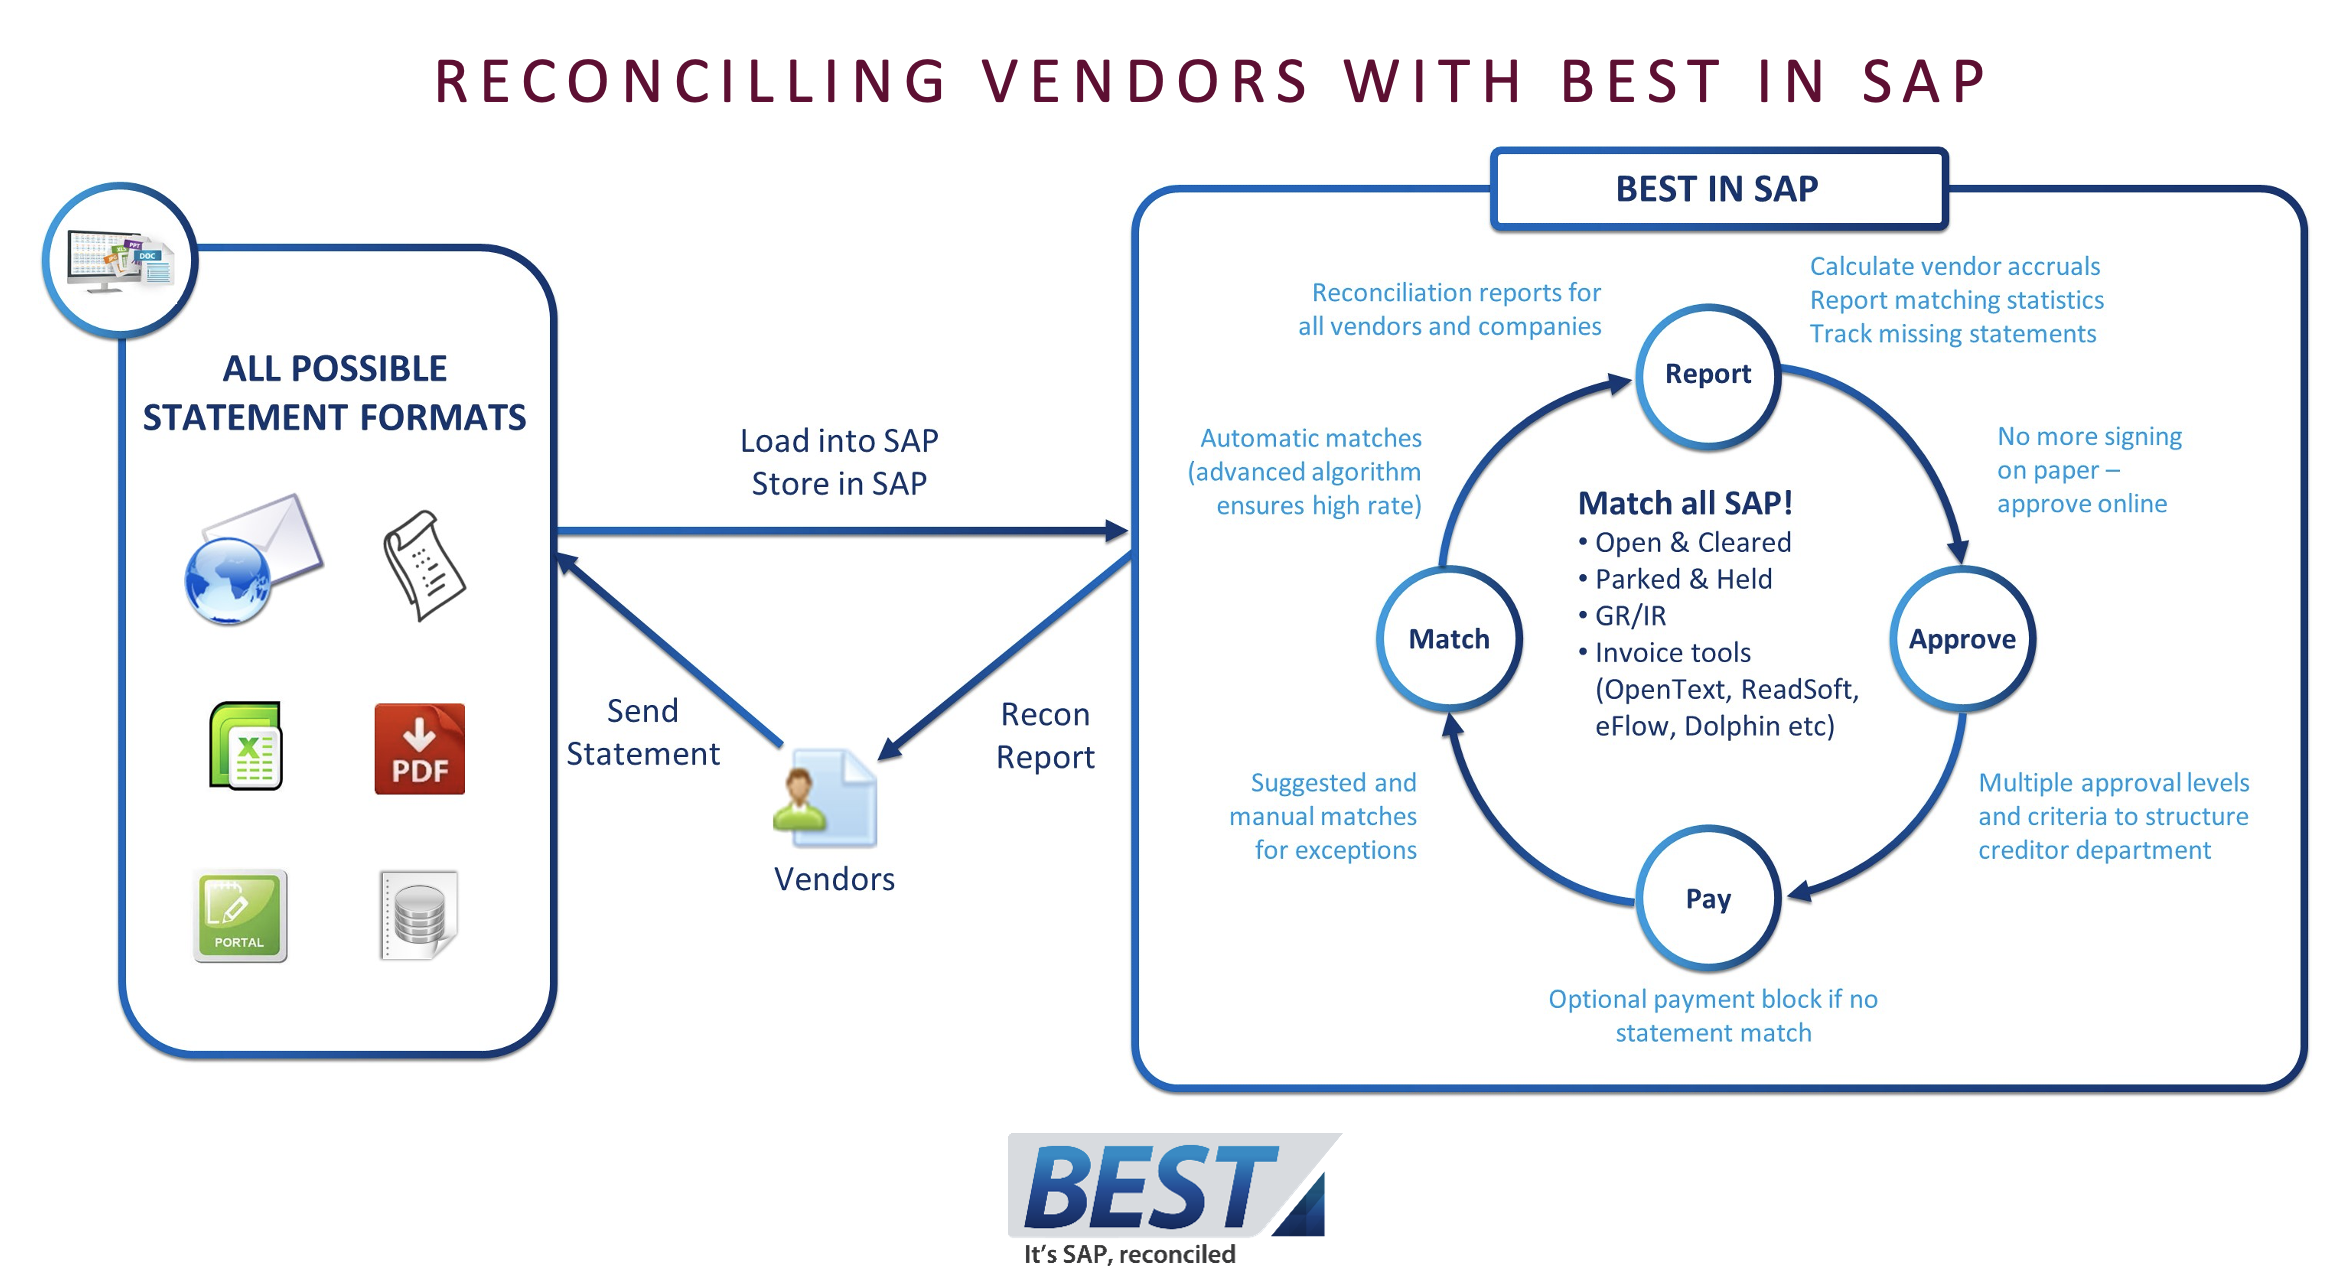 RECONCILING VENDORS WITH BEST IN SAP